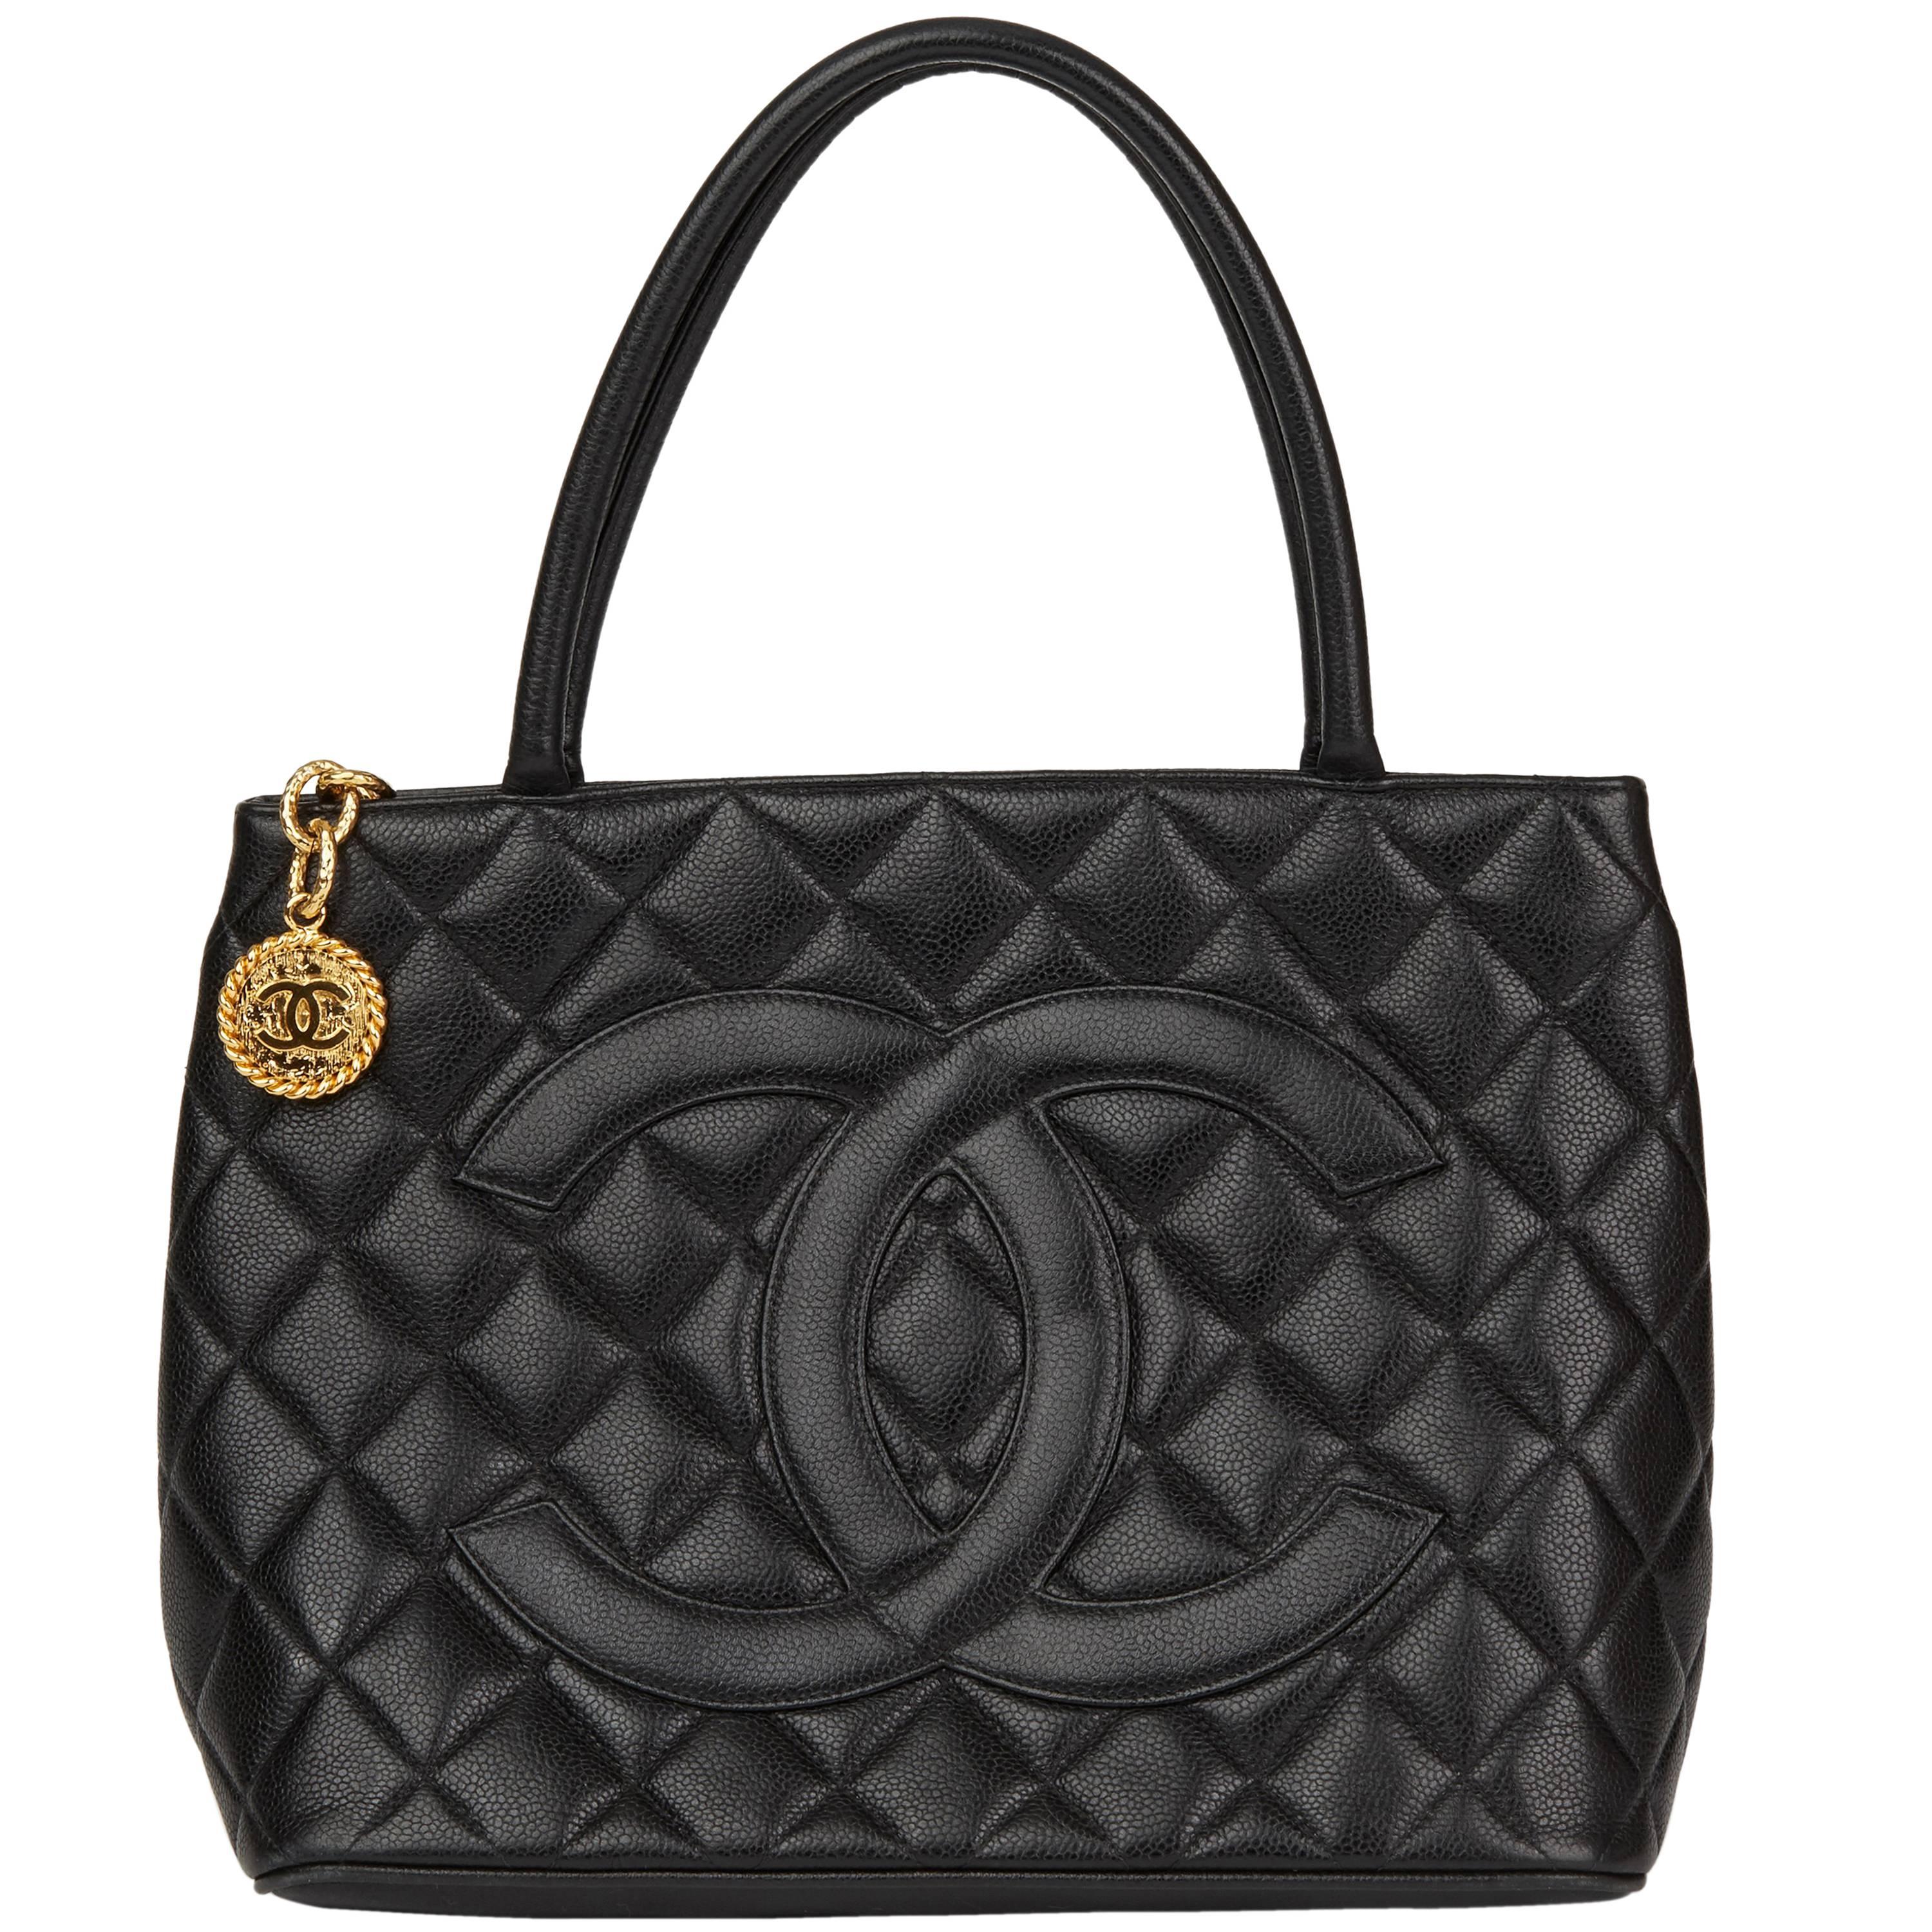 1997 Chanel Black Quilted Caviar Leather Vintage Medallion Tote